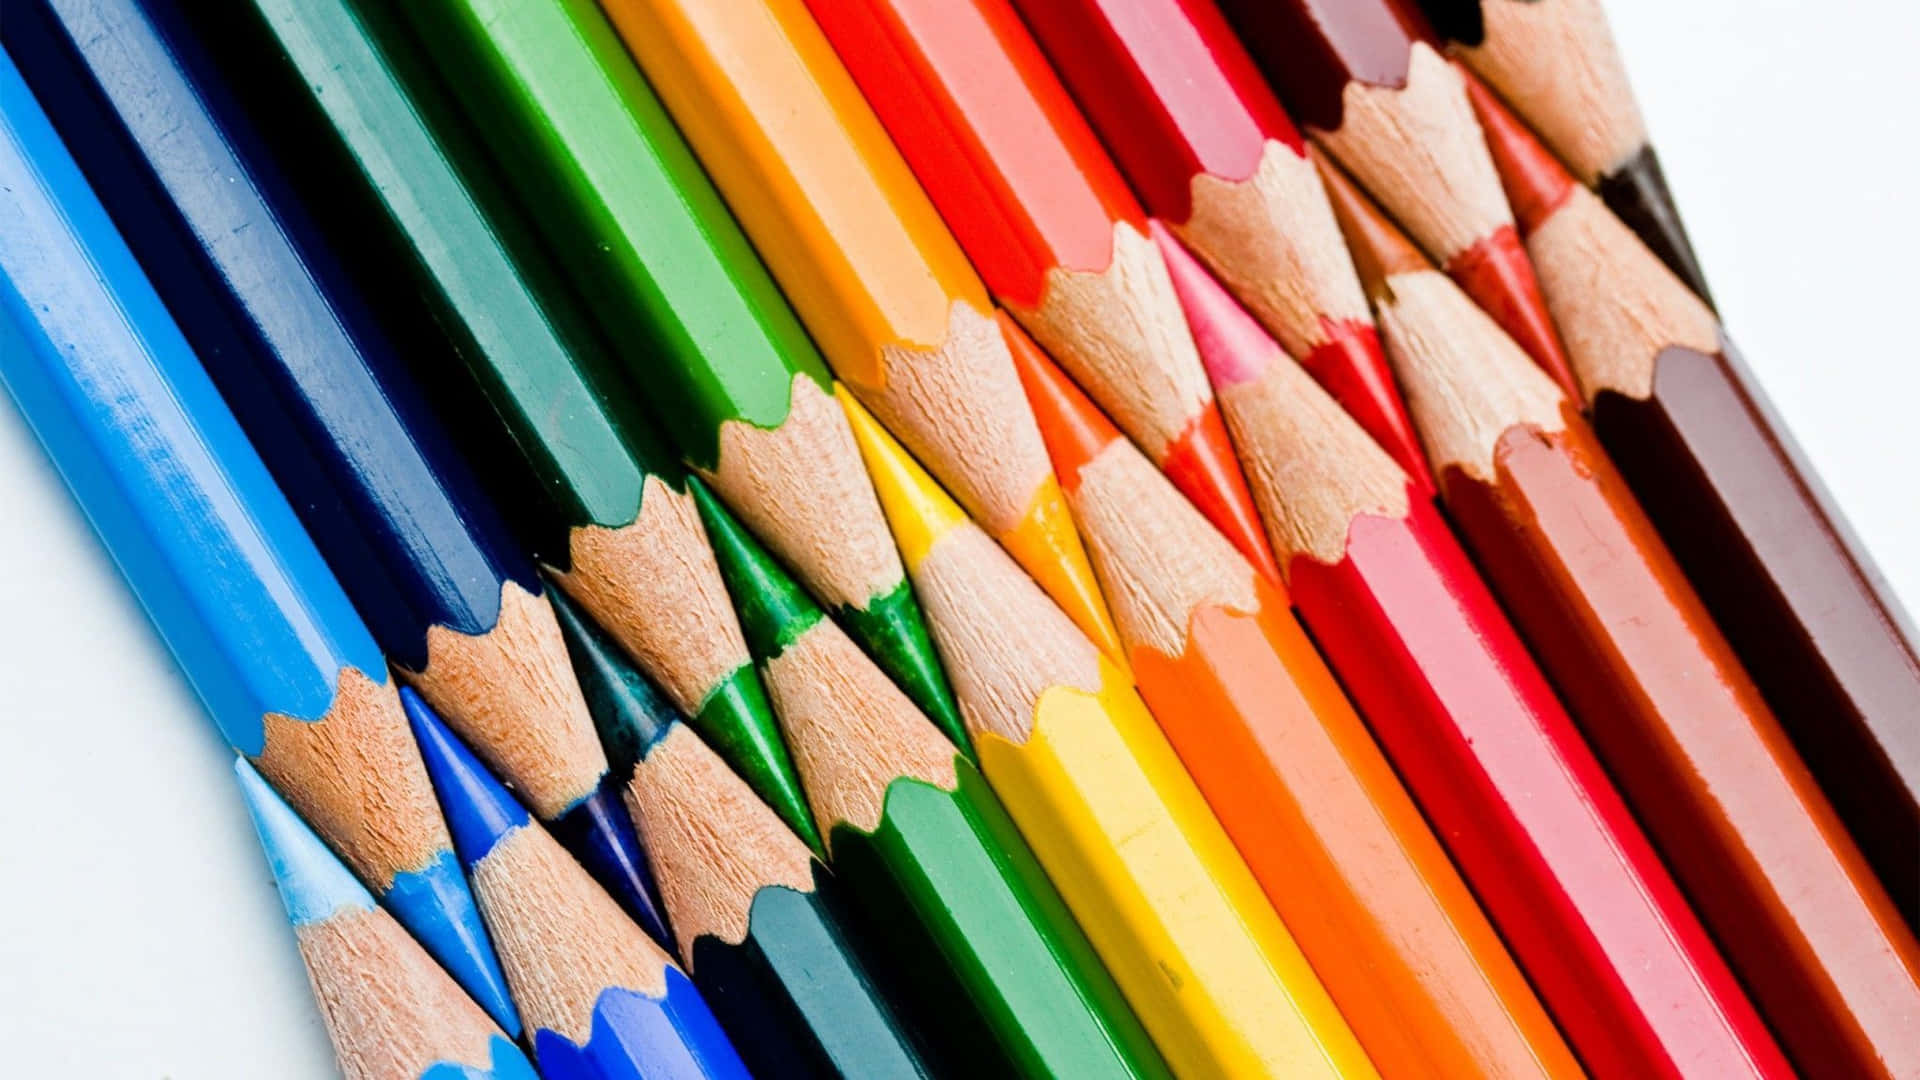 A Group Of Colored Pencils Wallpaper